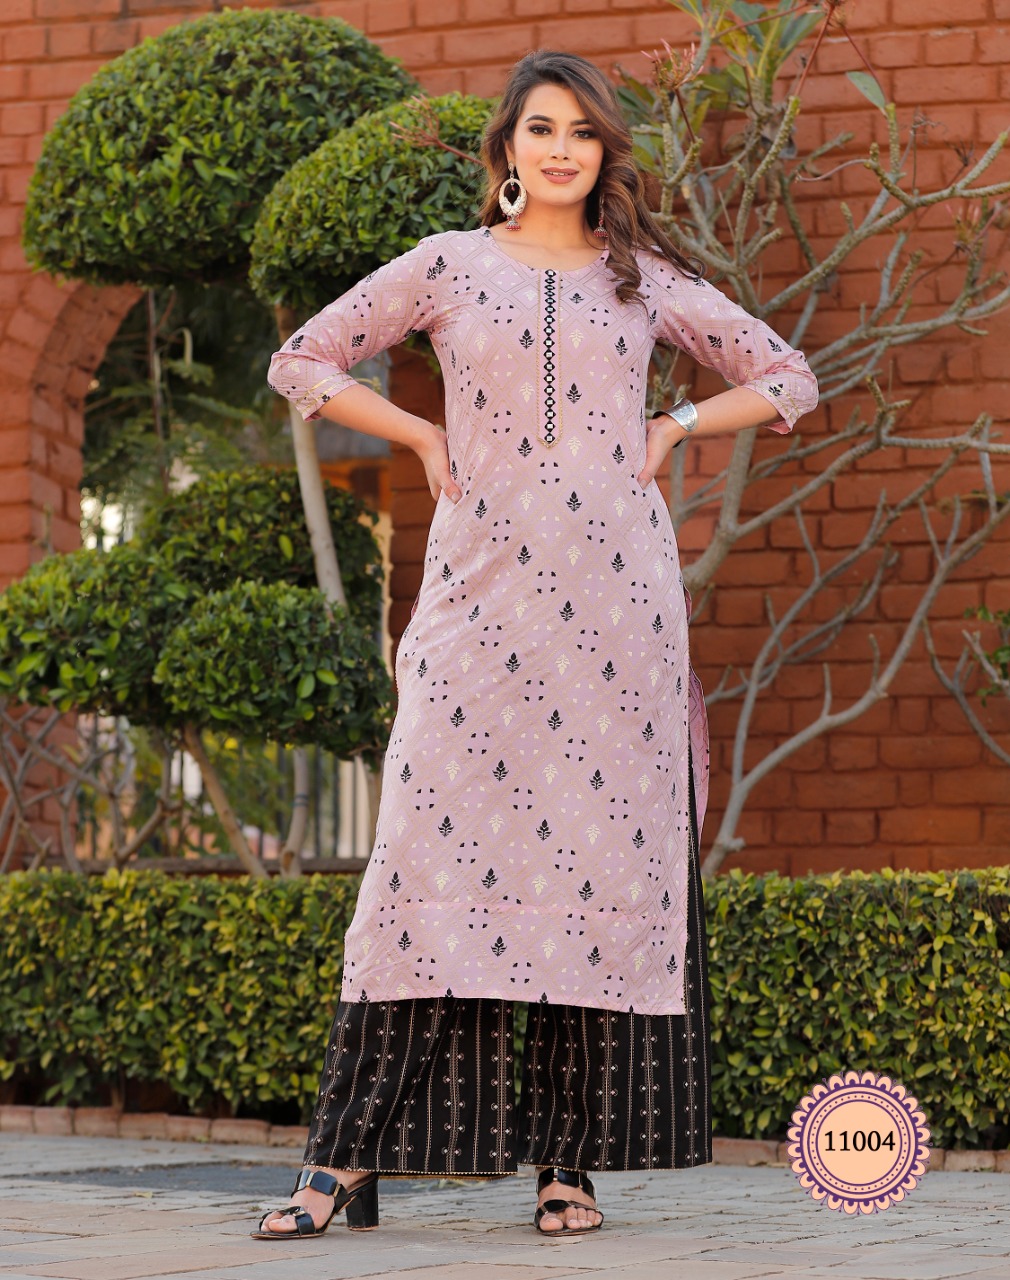 Long Kurti With Plazzo Pant - Look stylish and feel Confident